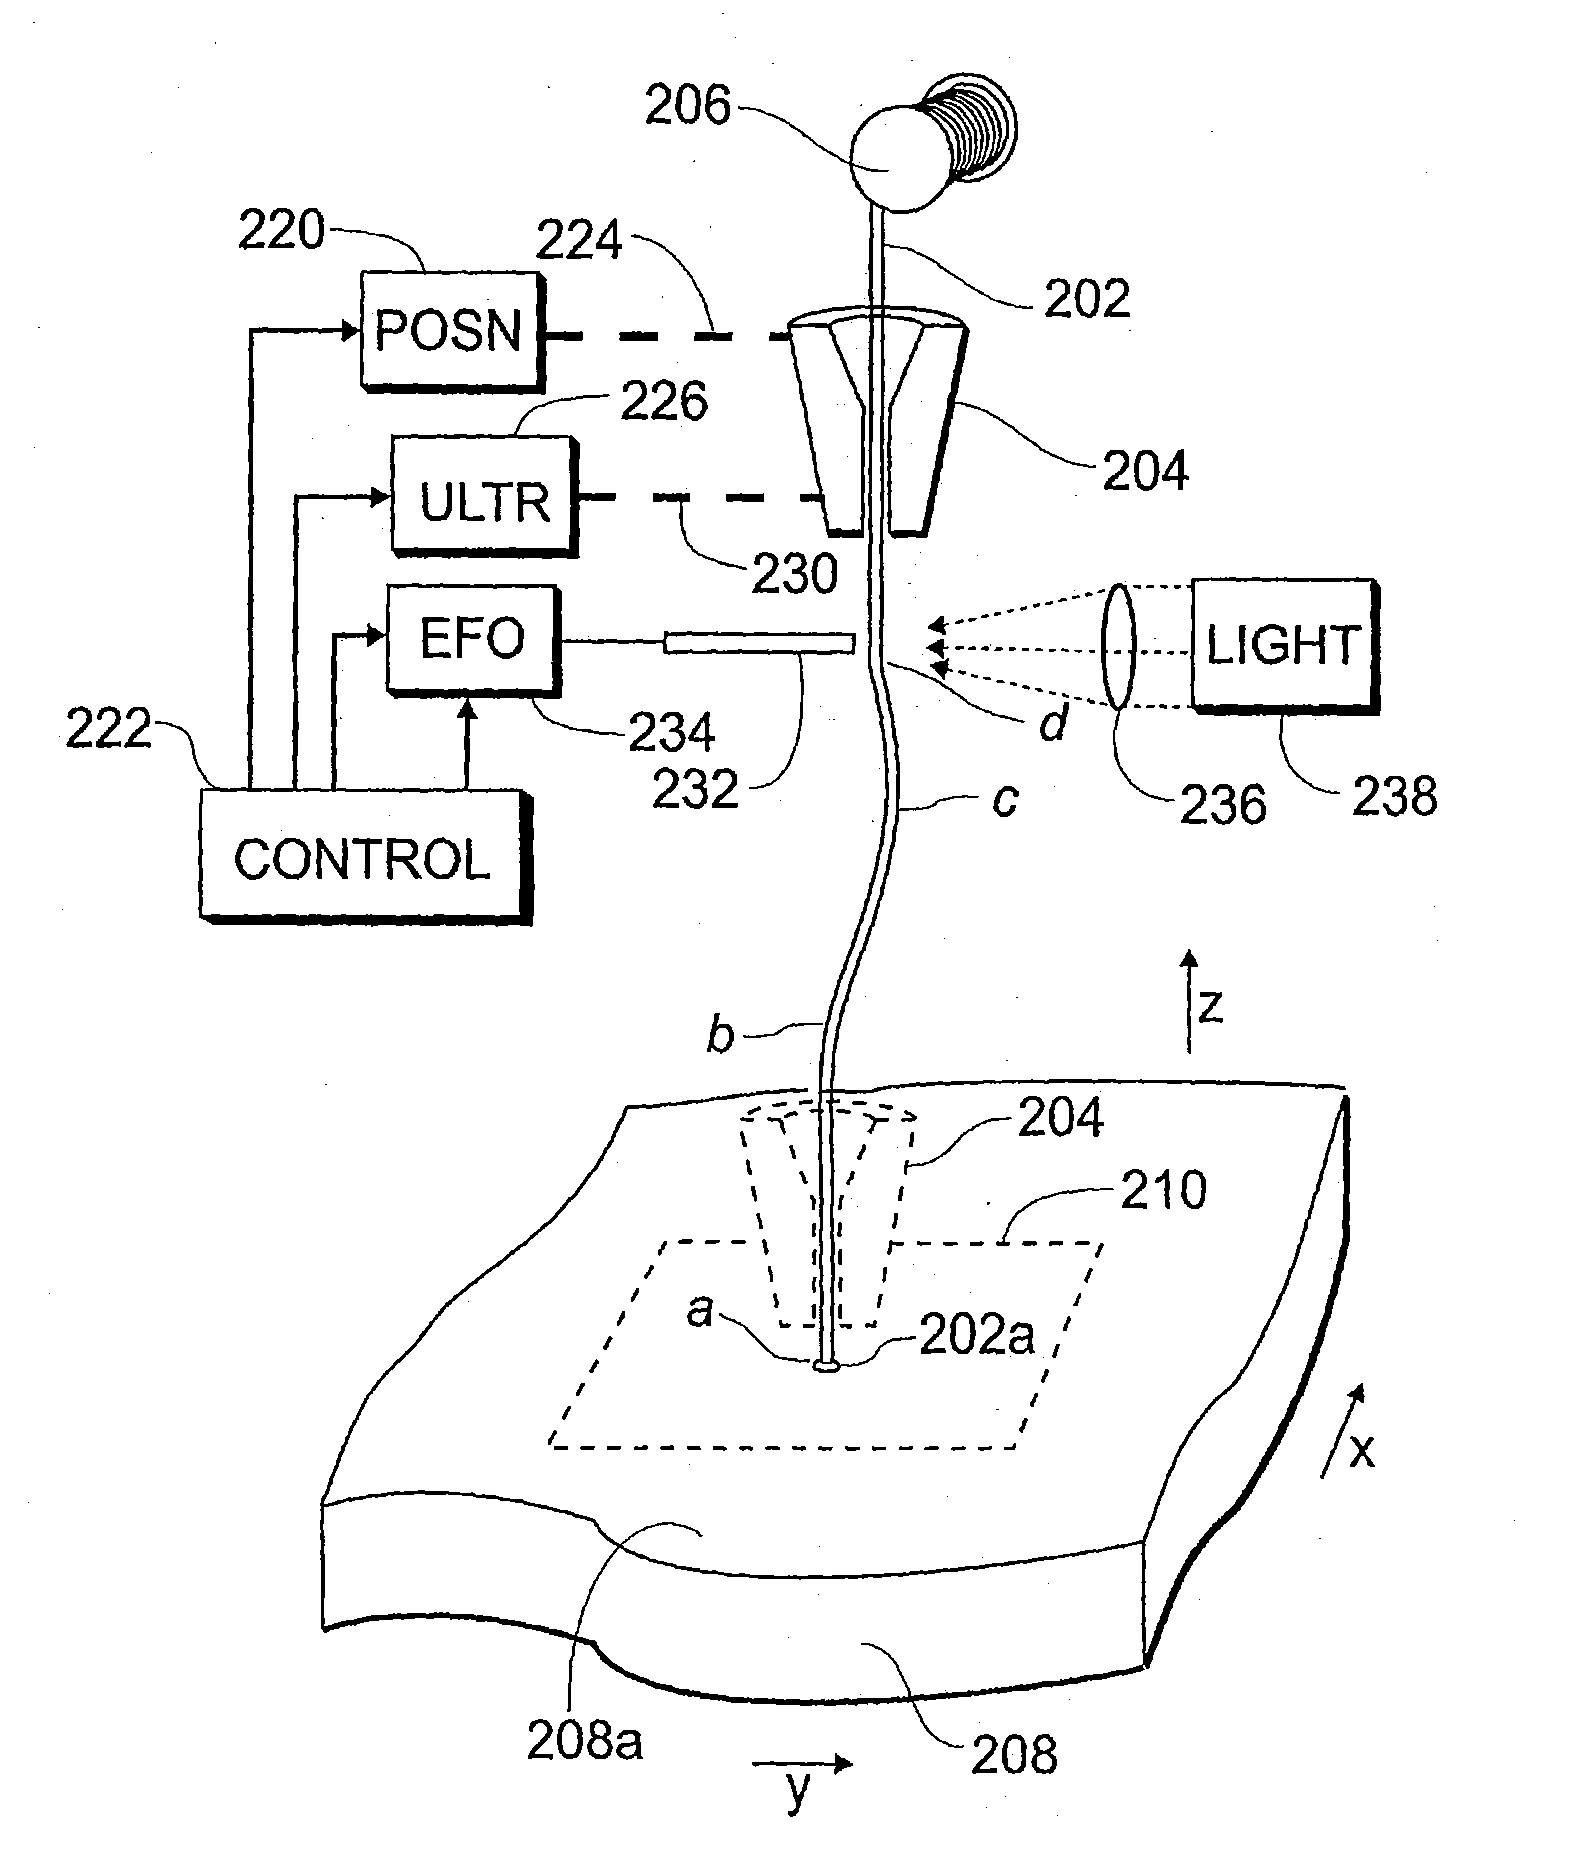 Method Of Wirebonding That Utilizes A Gas Flow Within A Capillary From Which A Wire Is Played Out